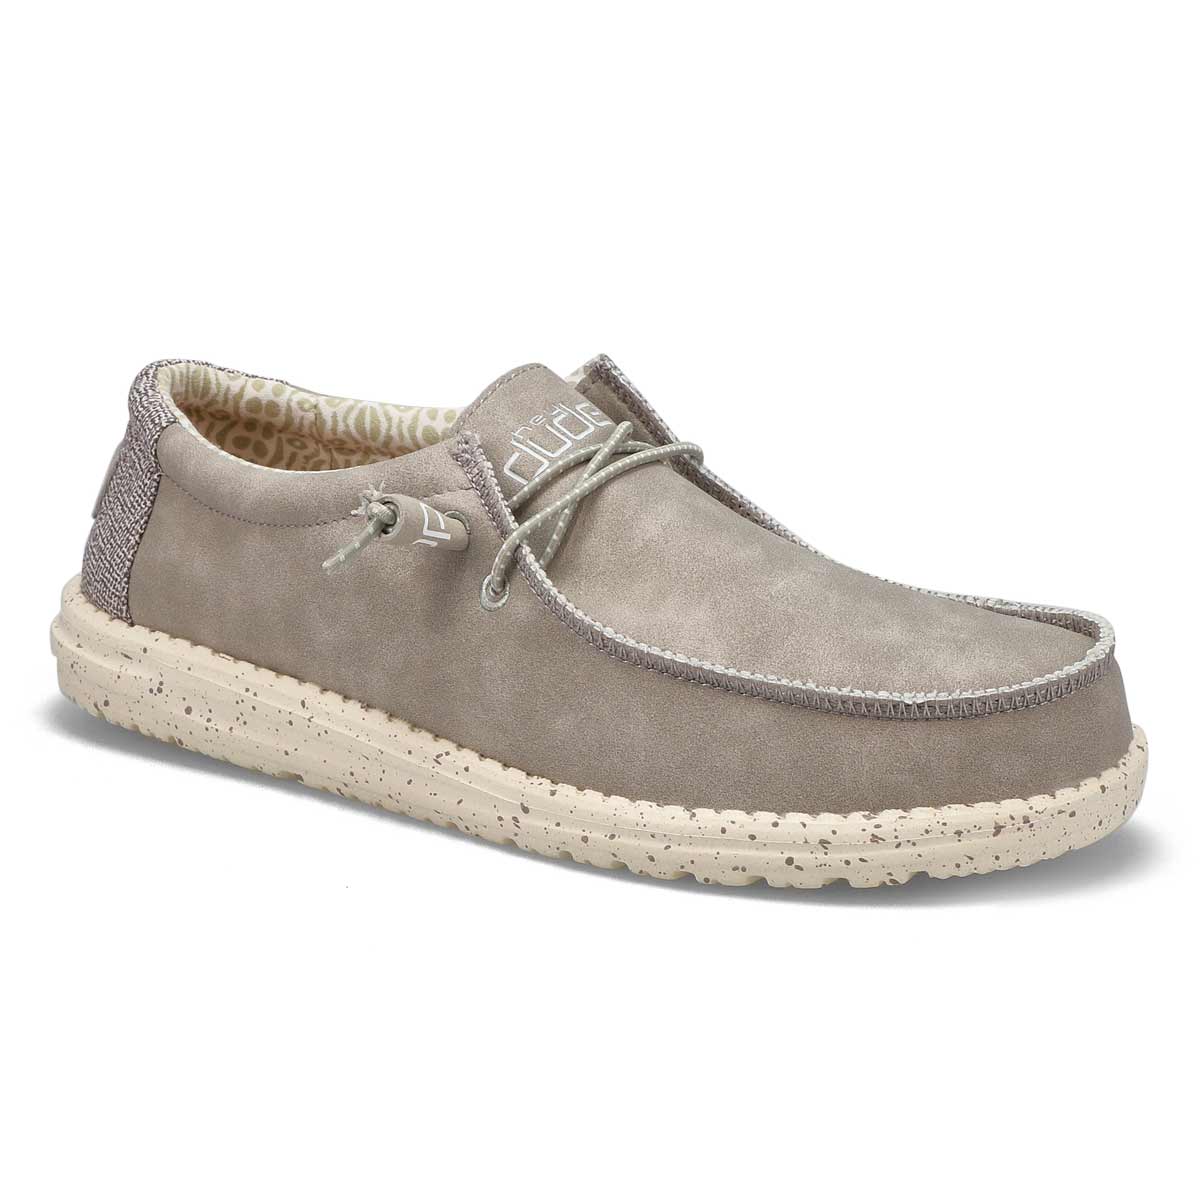 Men's Wally Recycled Leather Shoe - Silver Birch